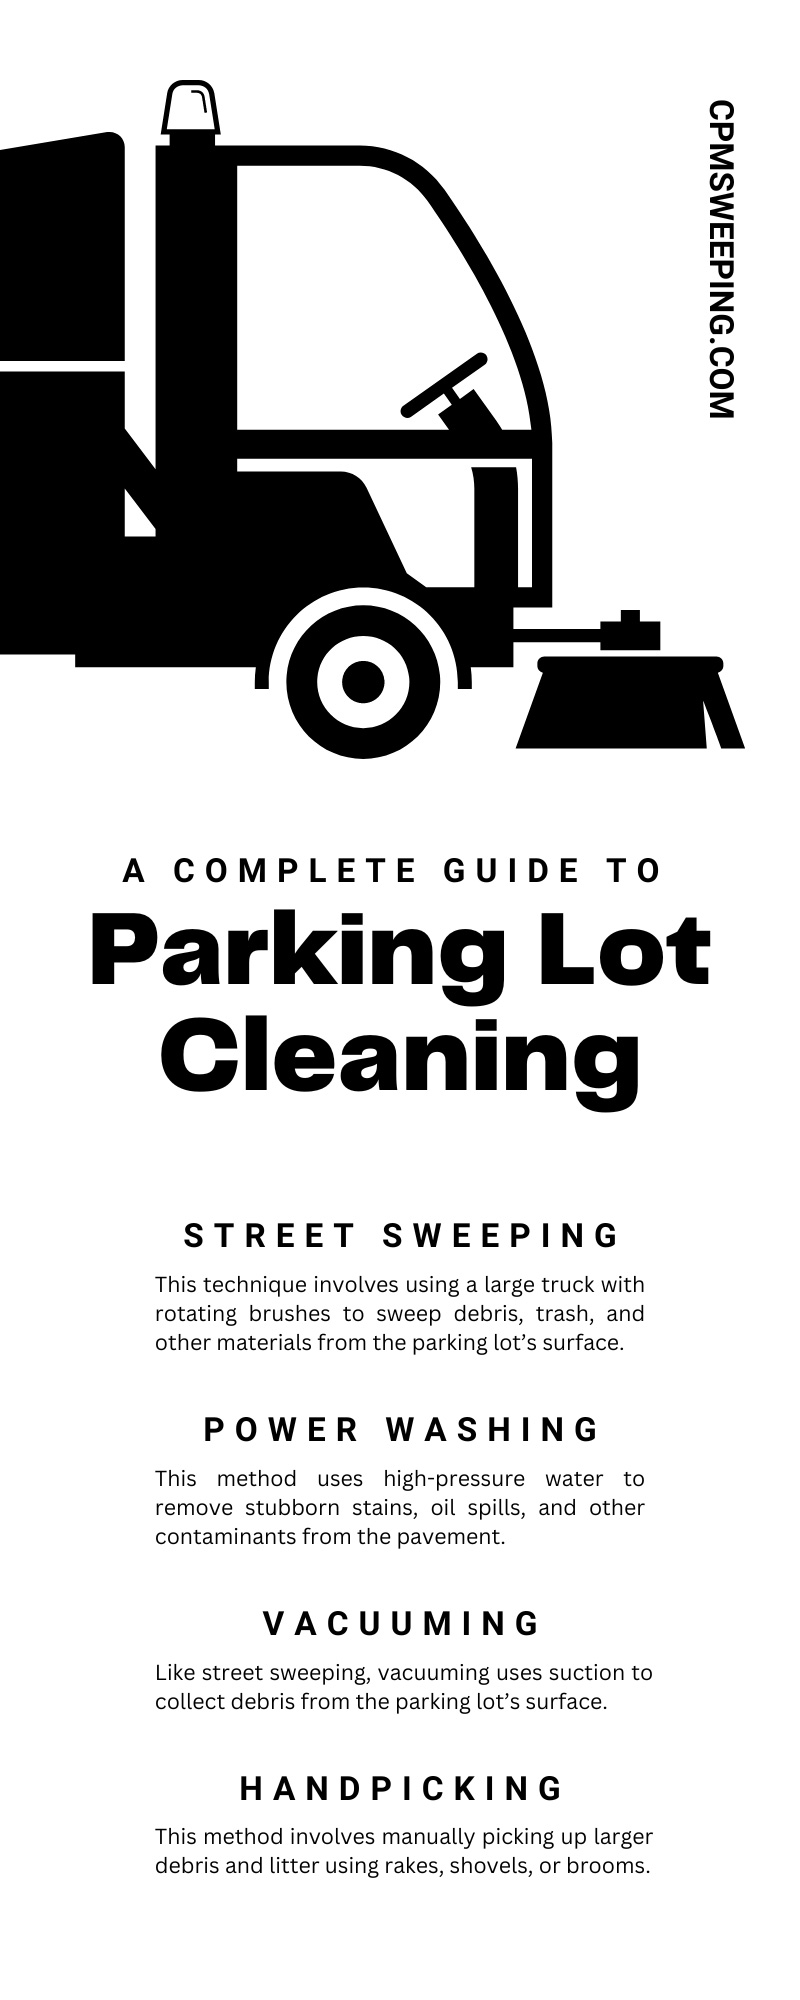 A Complete Guide to Parking Lot Cleaning
